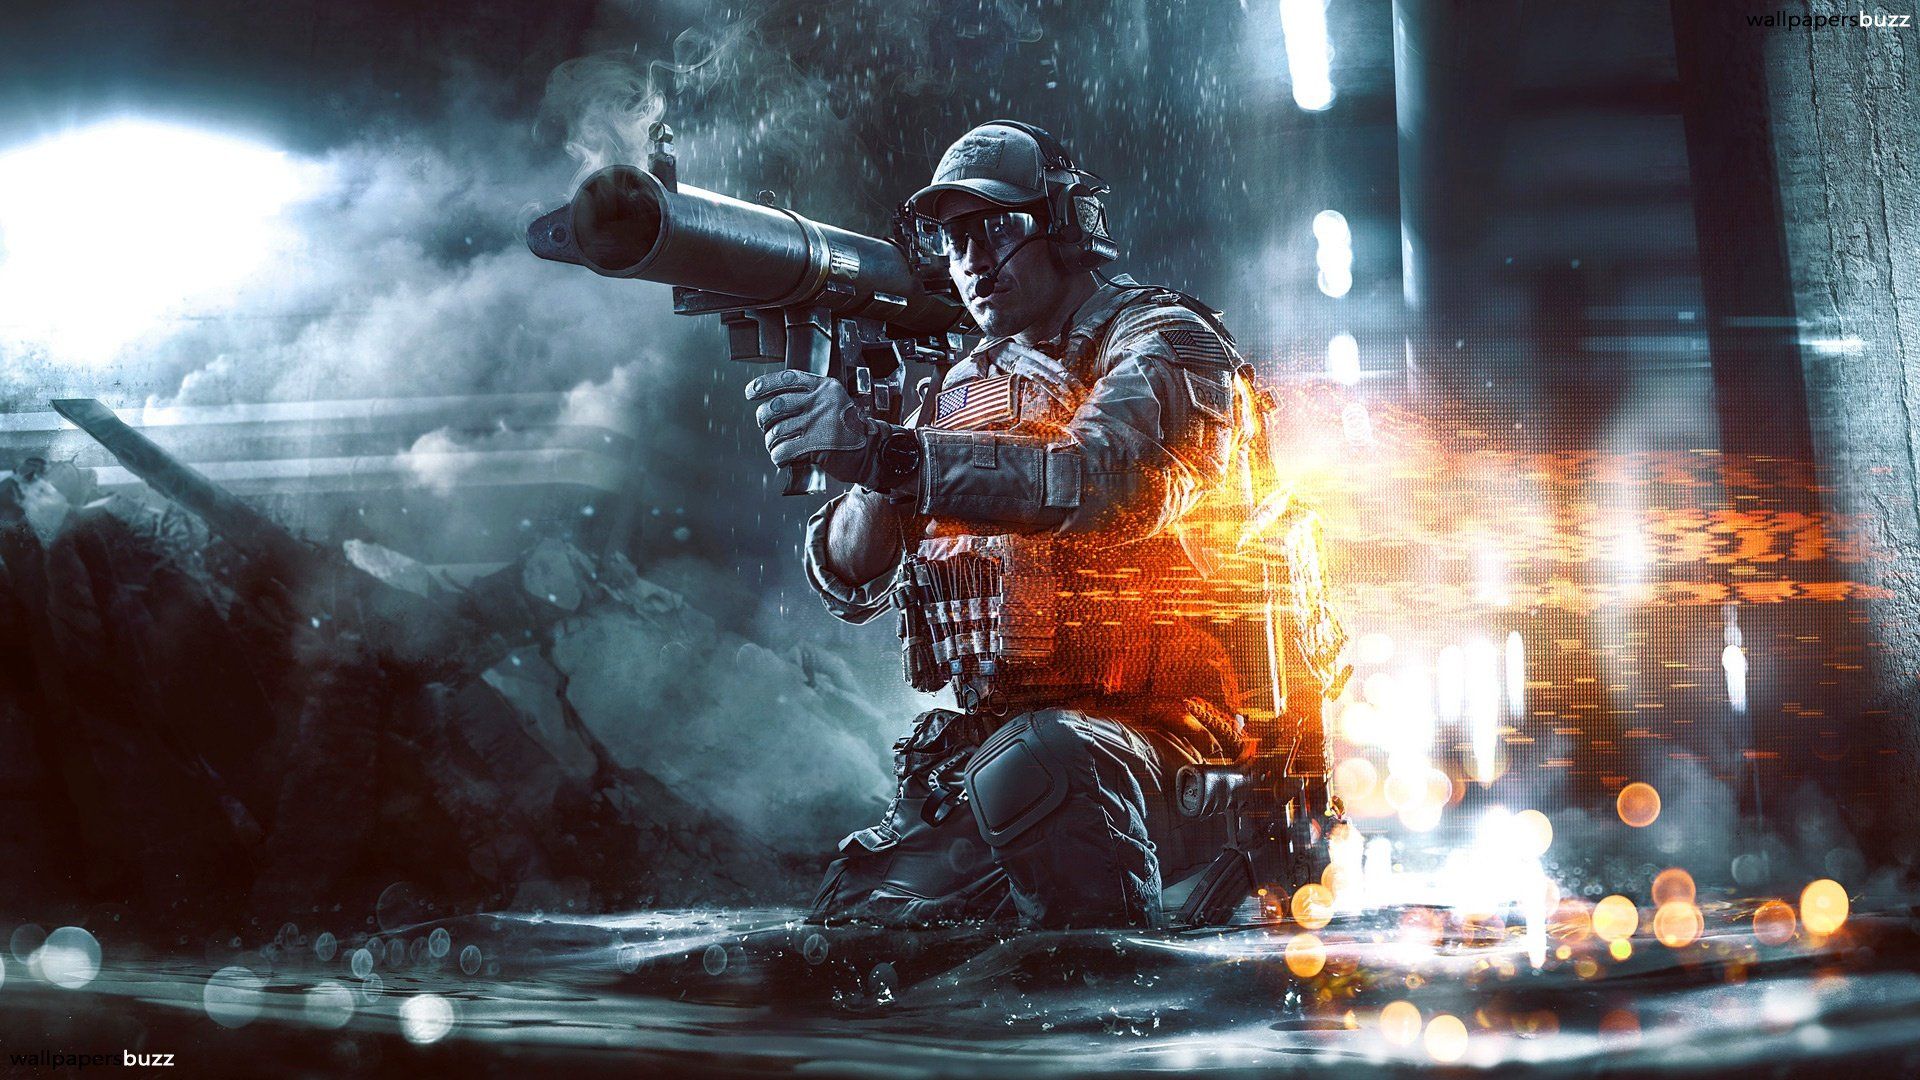 3840x1620 / 3840x1620 battlefield 4 4k pc hd wallpaper download -  Coolwallpapers.me!